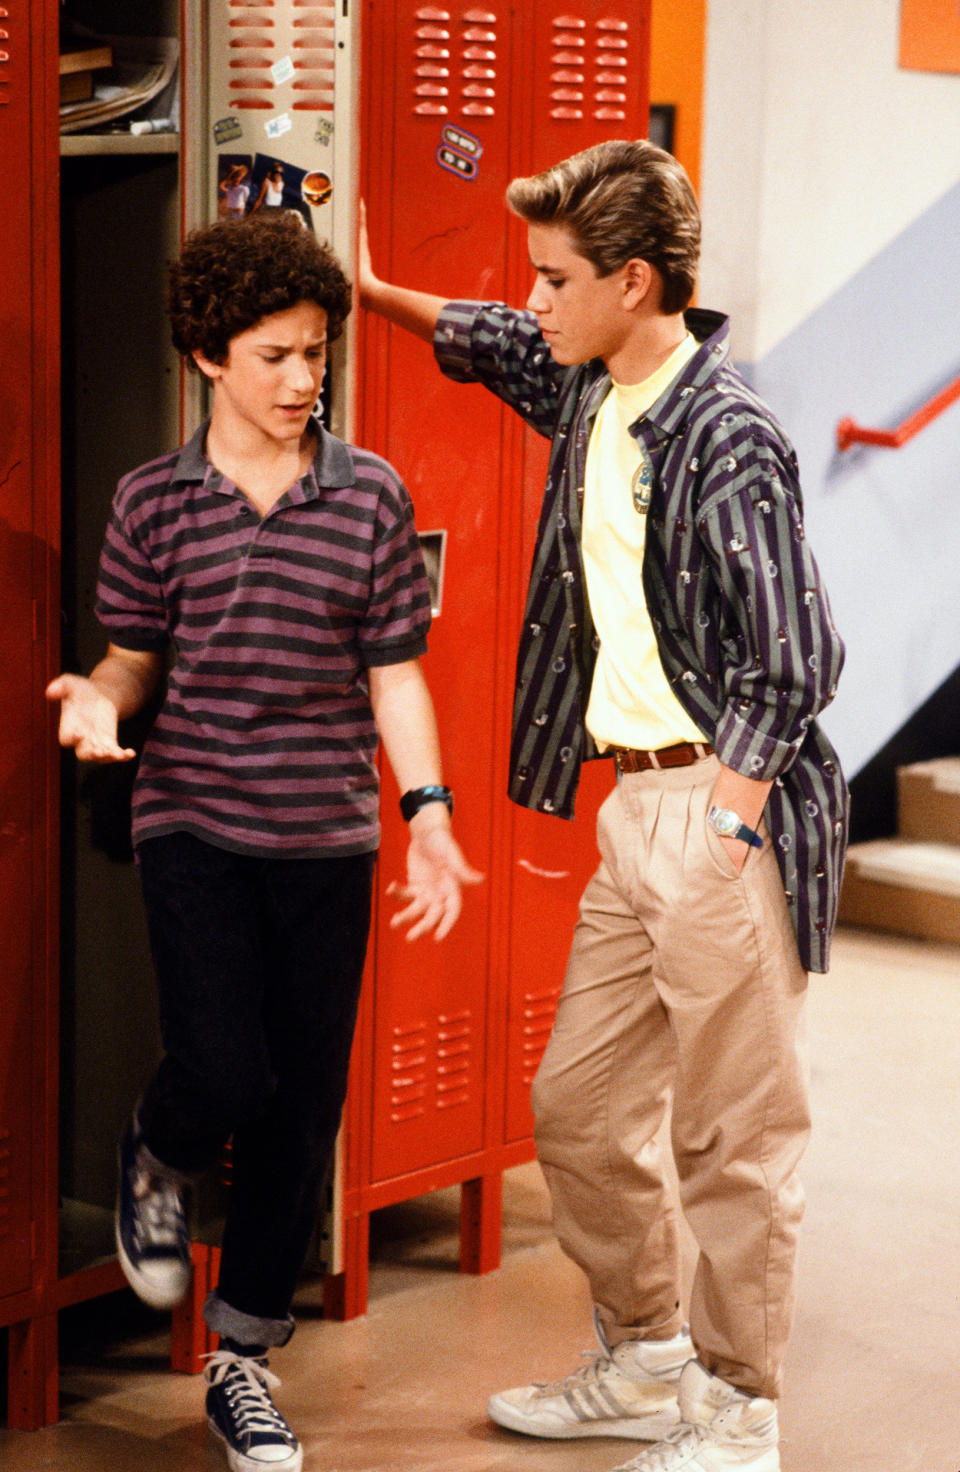 Image: Saved by the Bell - Season 1 (NBC)